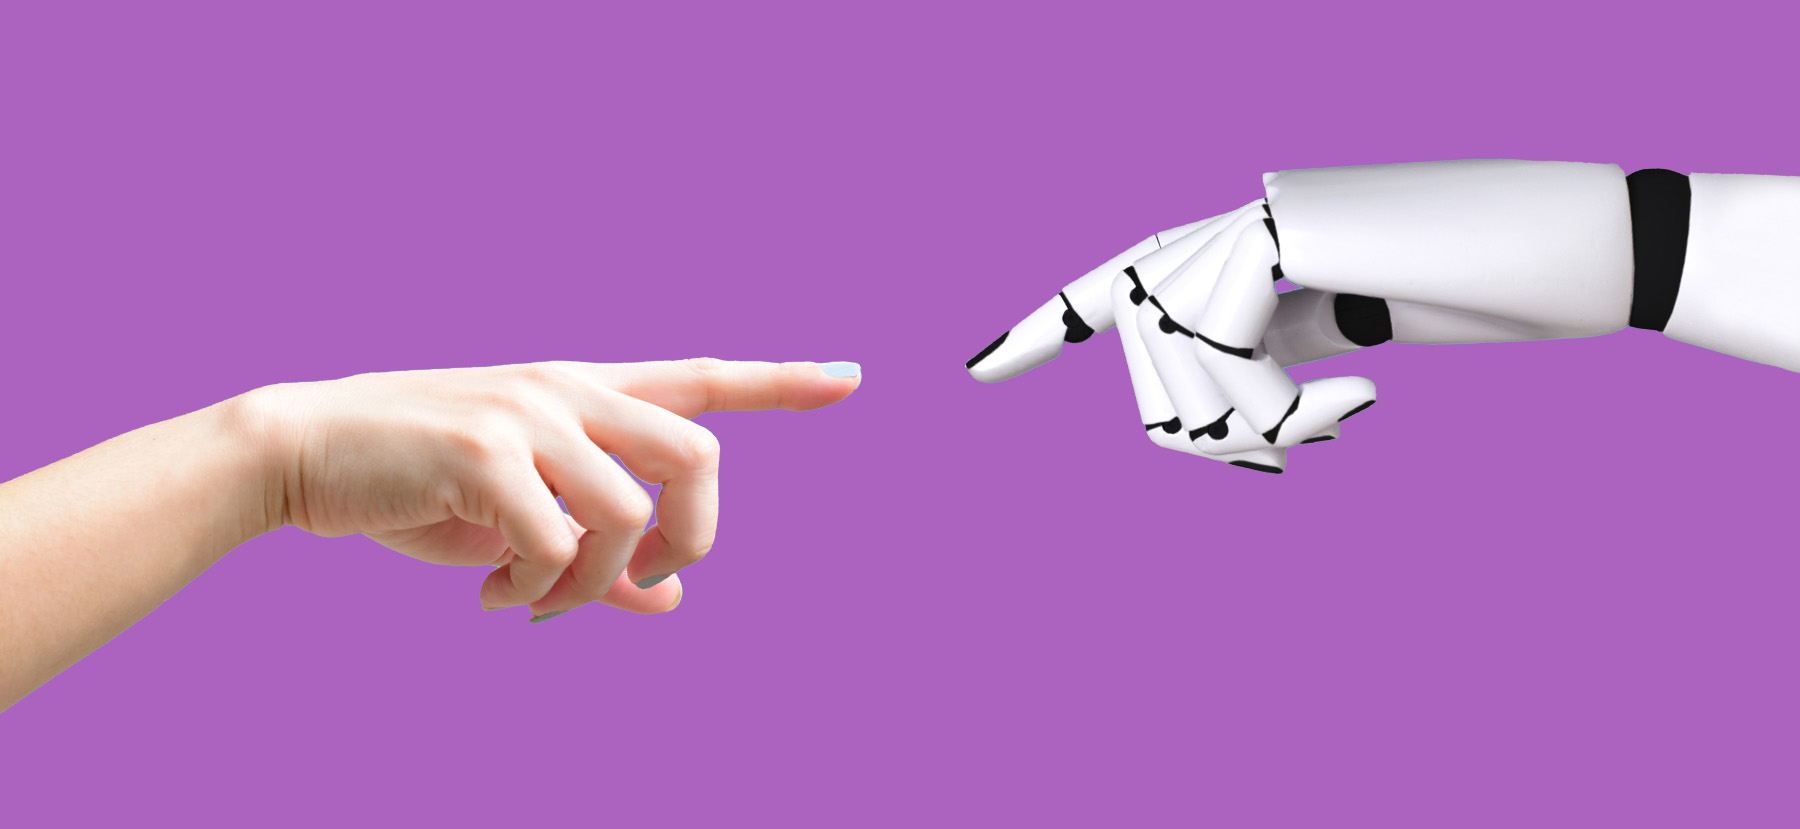 A human hand and a robotic hand reach for each other. 